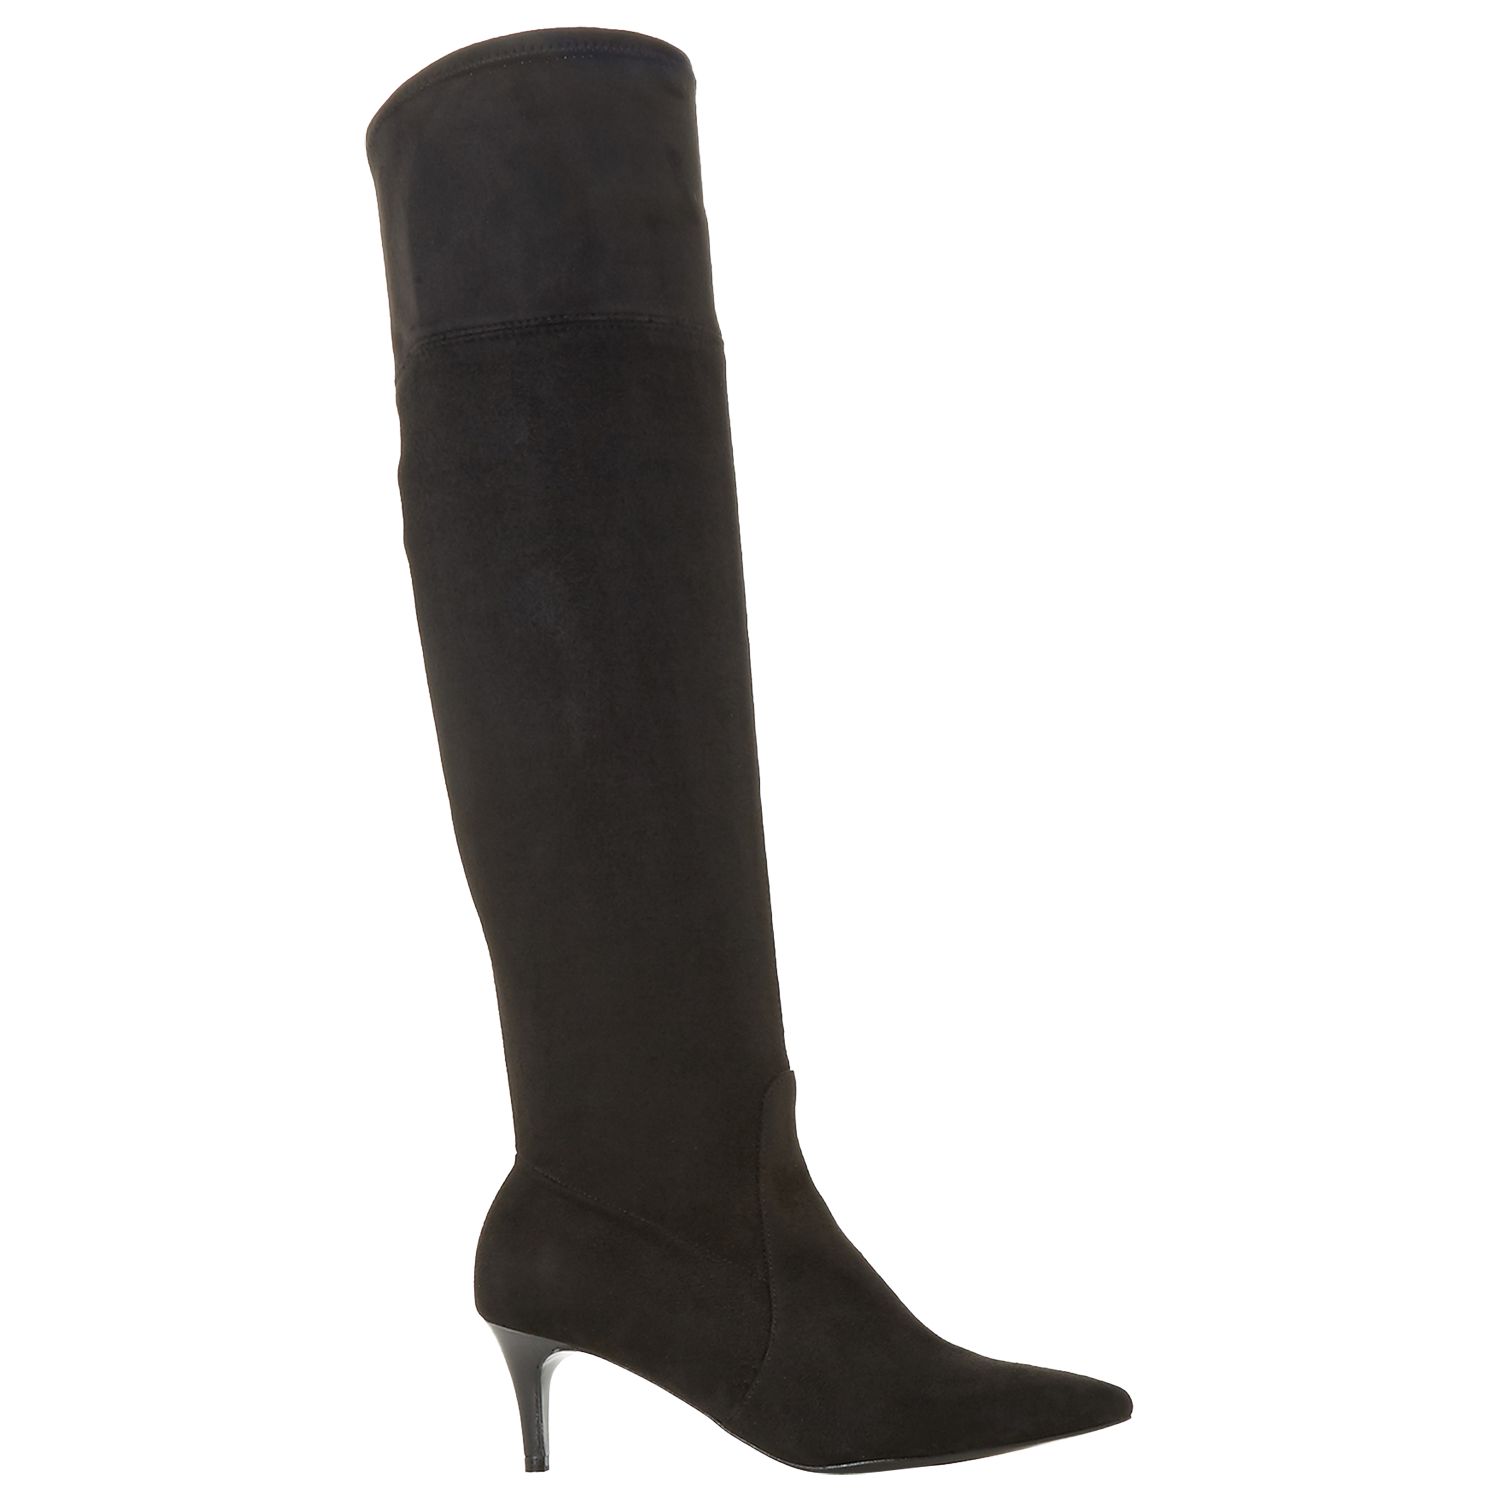 Dune Scarlette Over the Knee Boots, Black Microfibre, 7